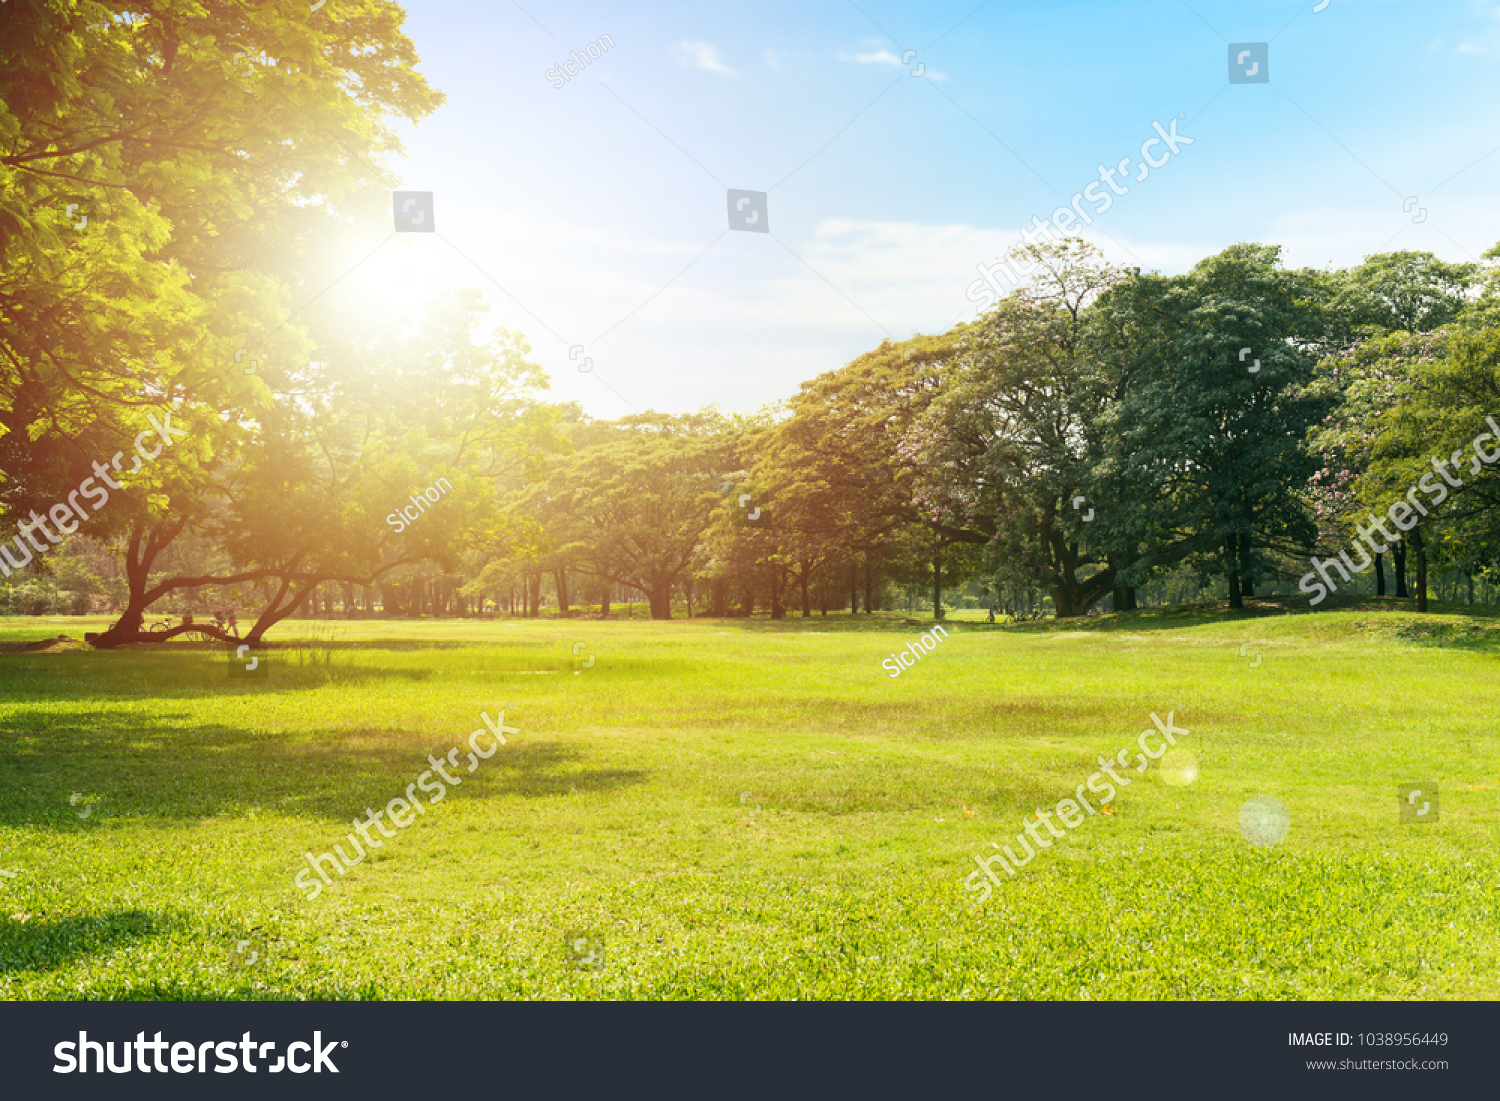 Scenic view of the park with green grass field in city and a cloudy blue sky background #1038956449